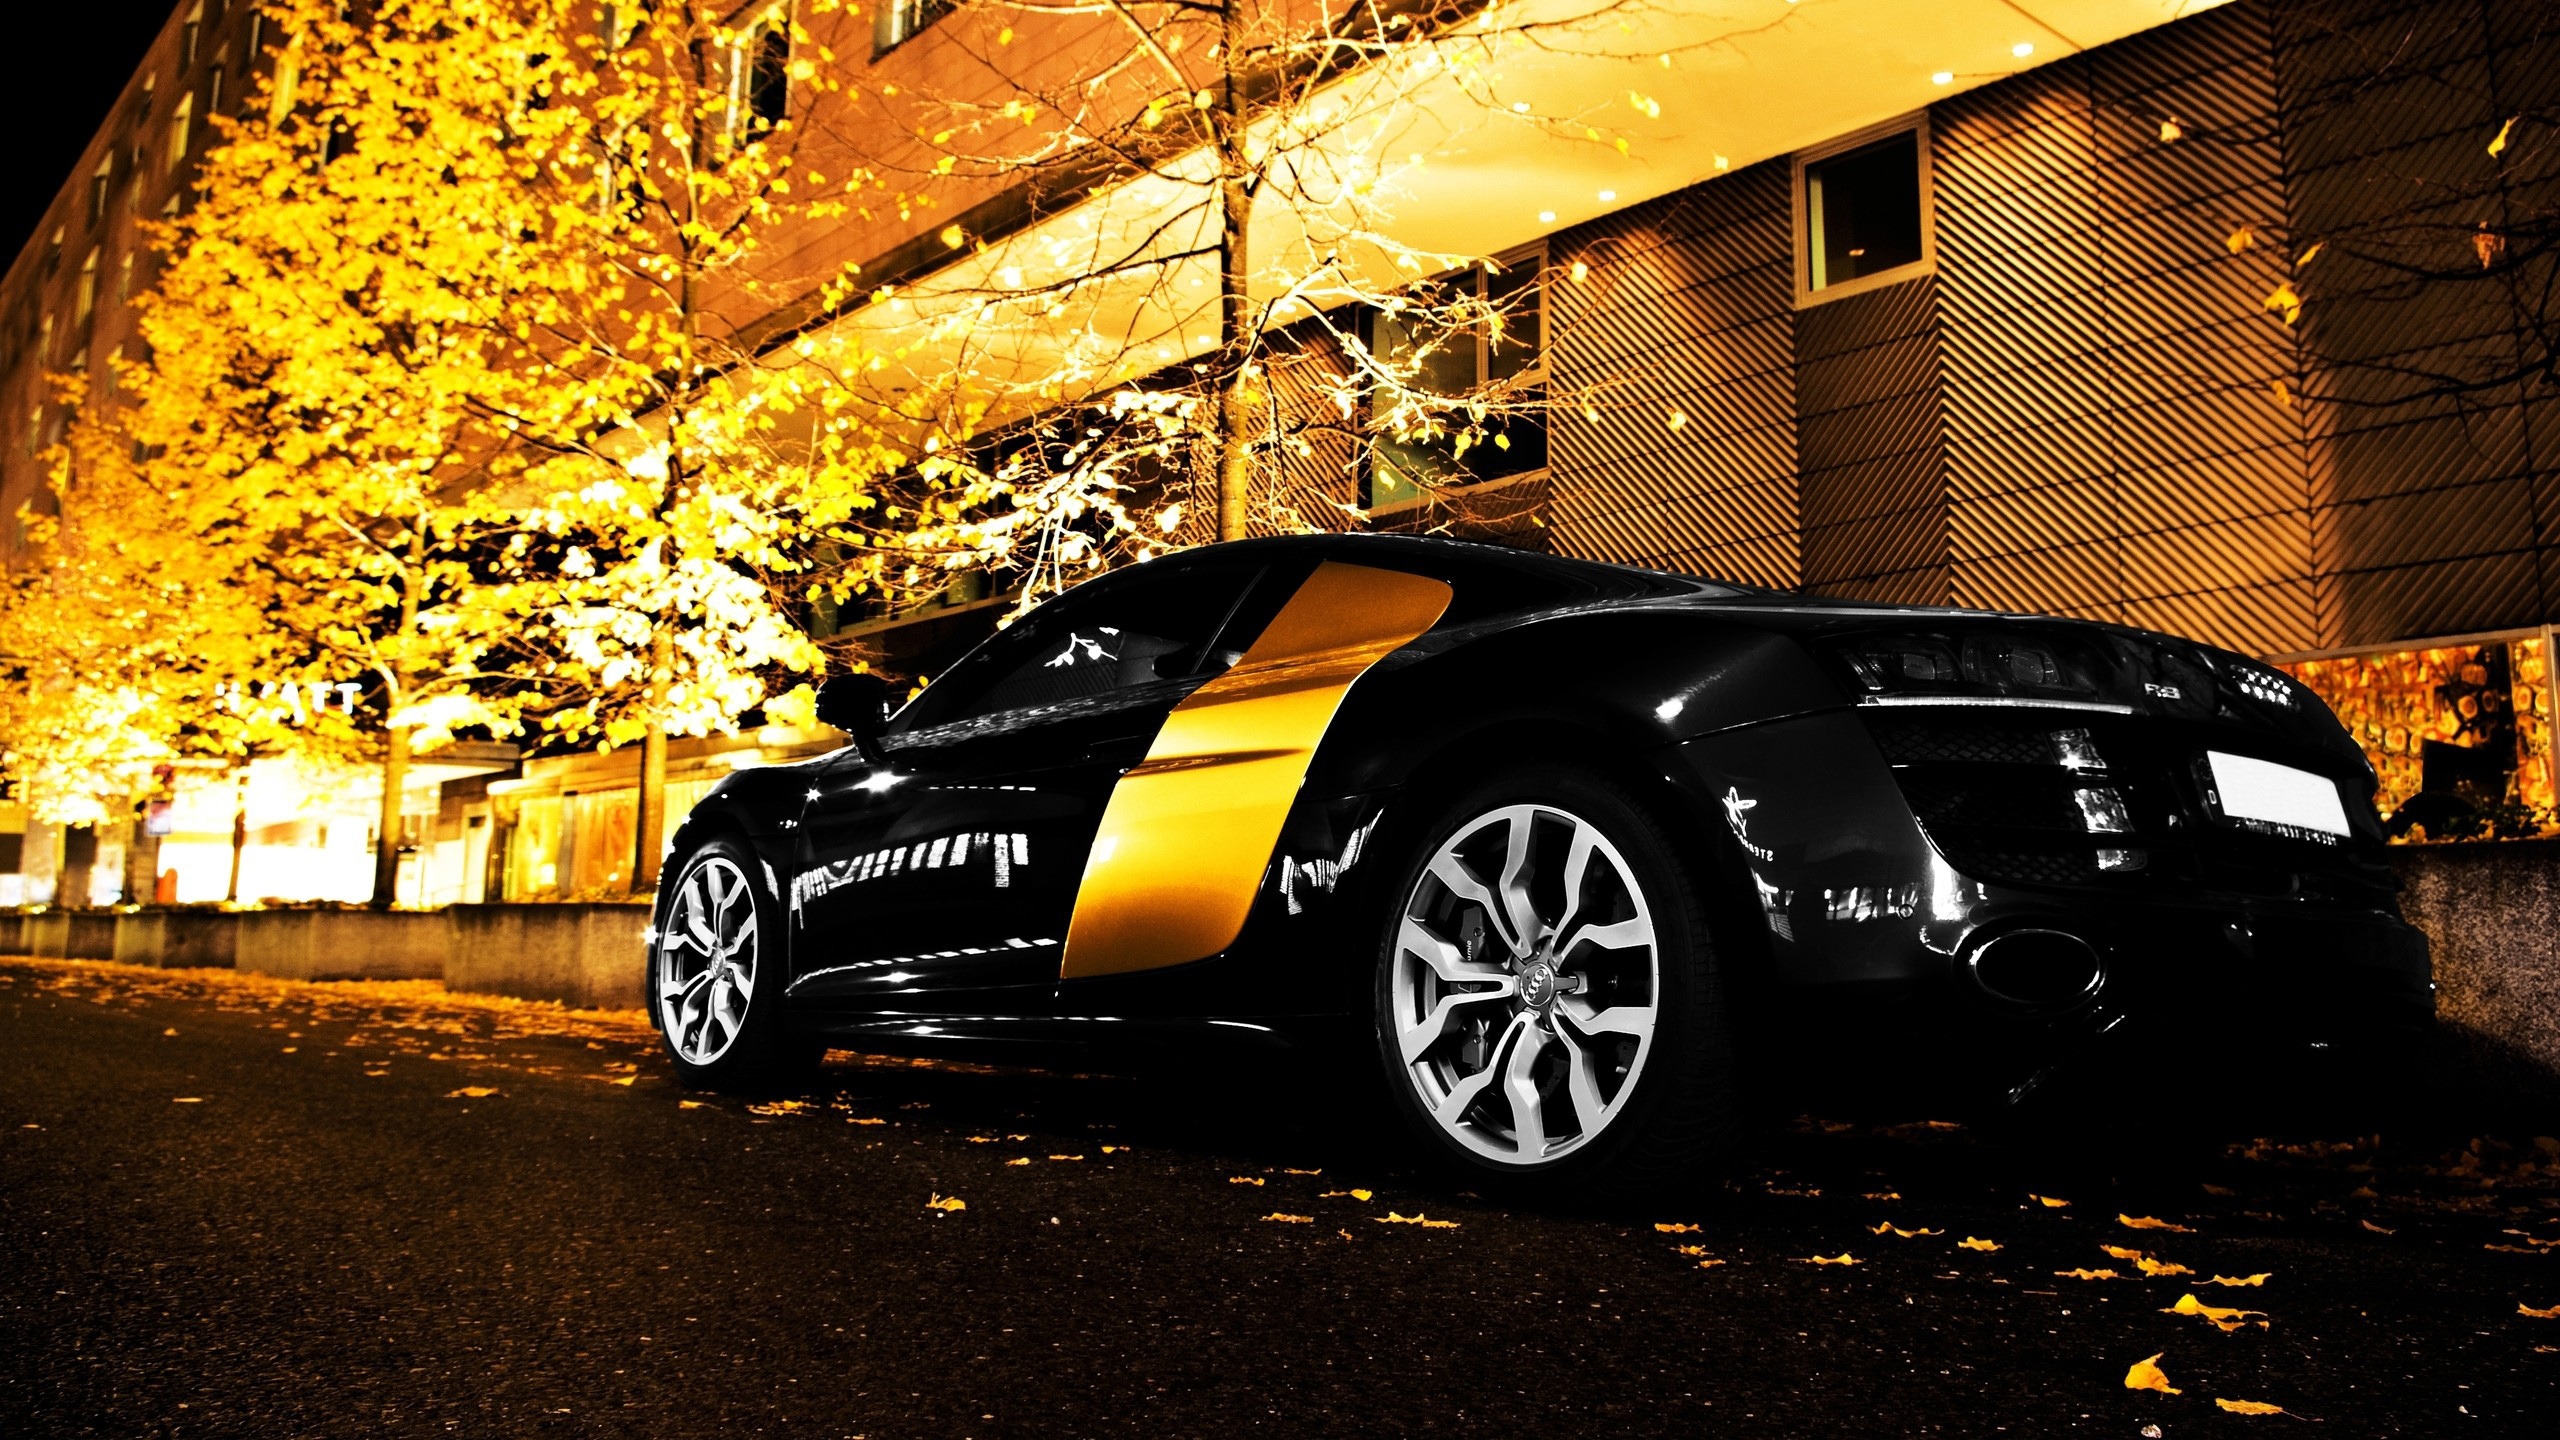 Gorgeous Audi R8 for 2560x1440 HDTV resolution